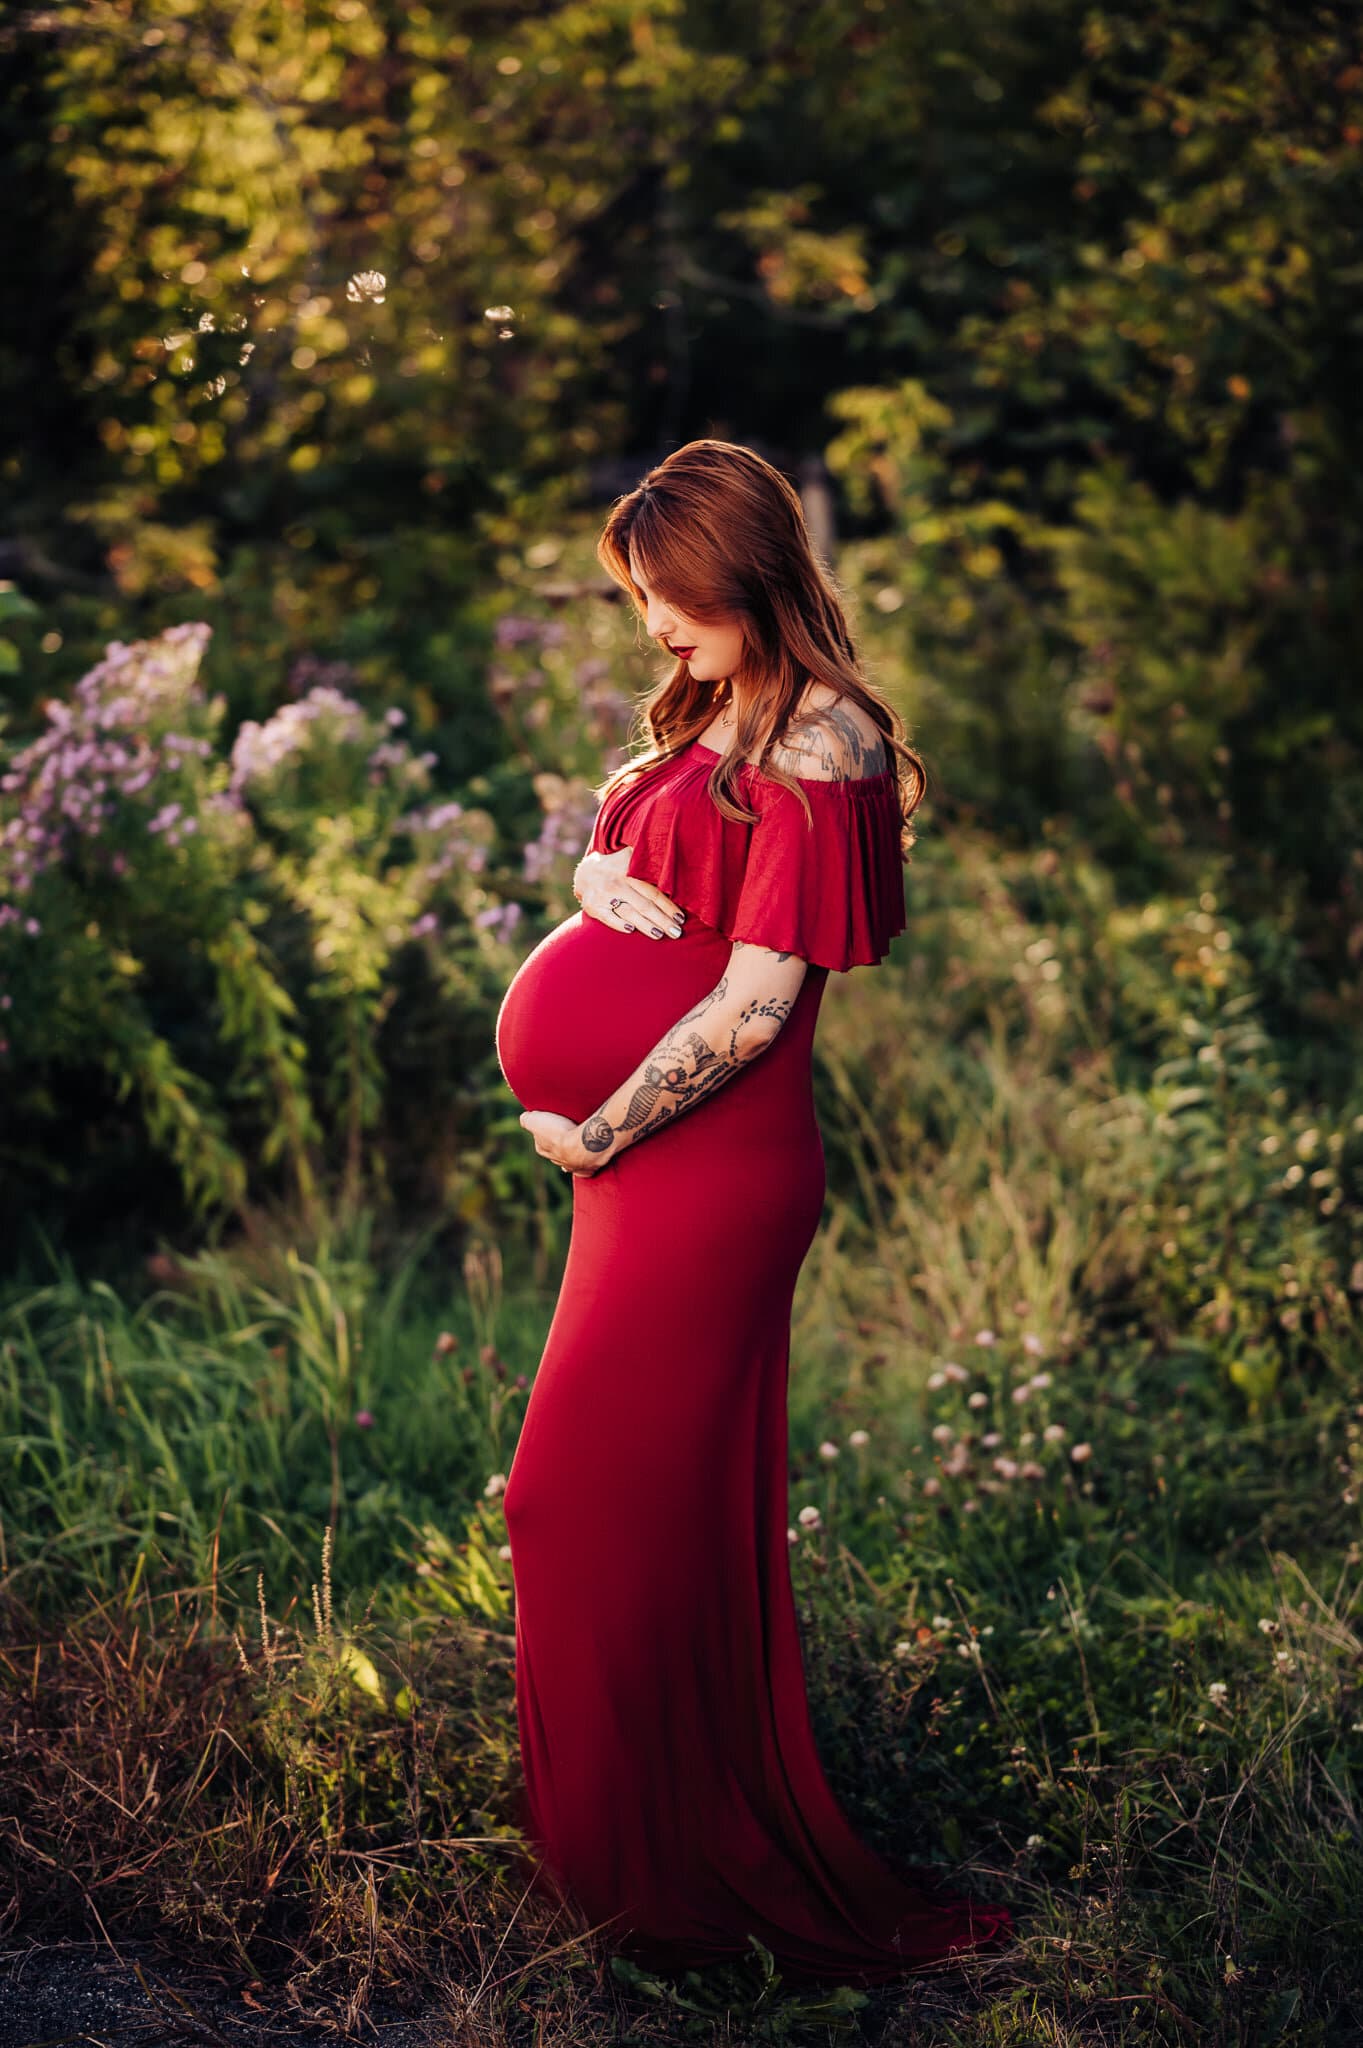 Pregnant Woman wearing red dress maternity photography